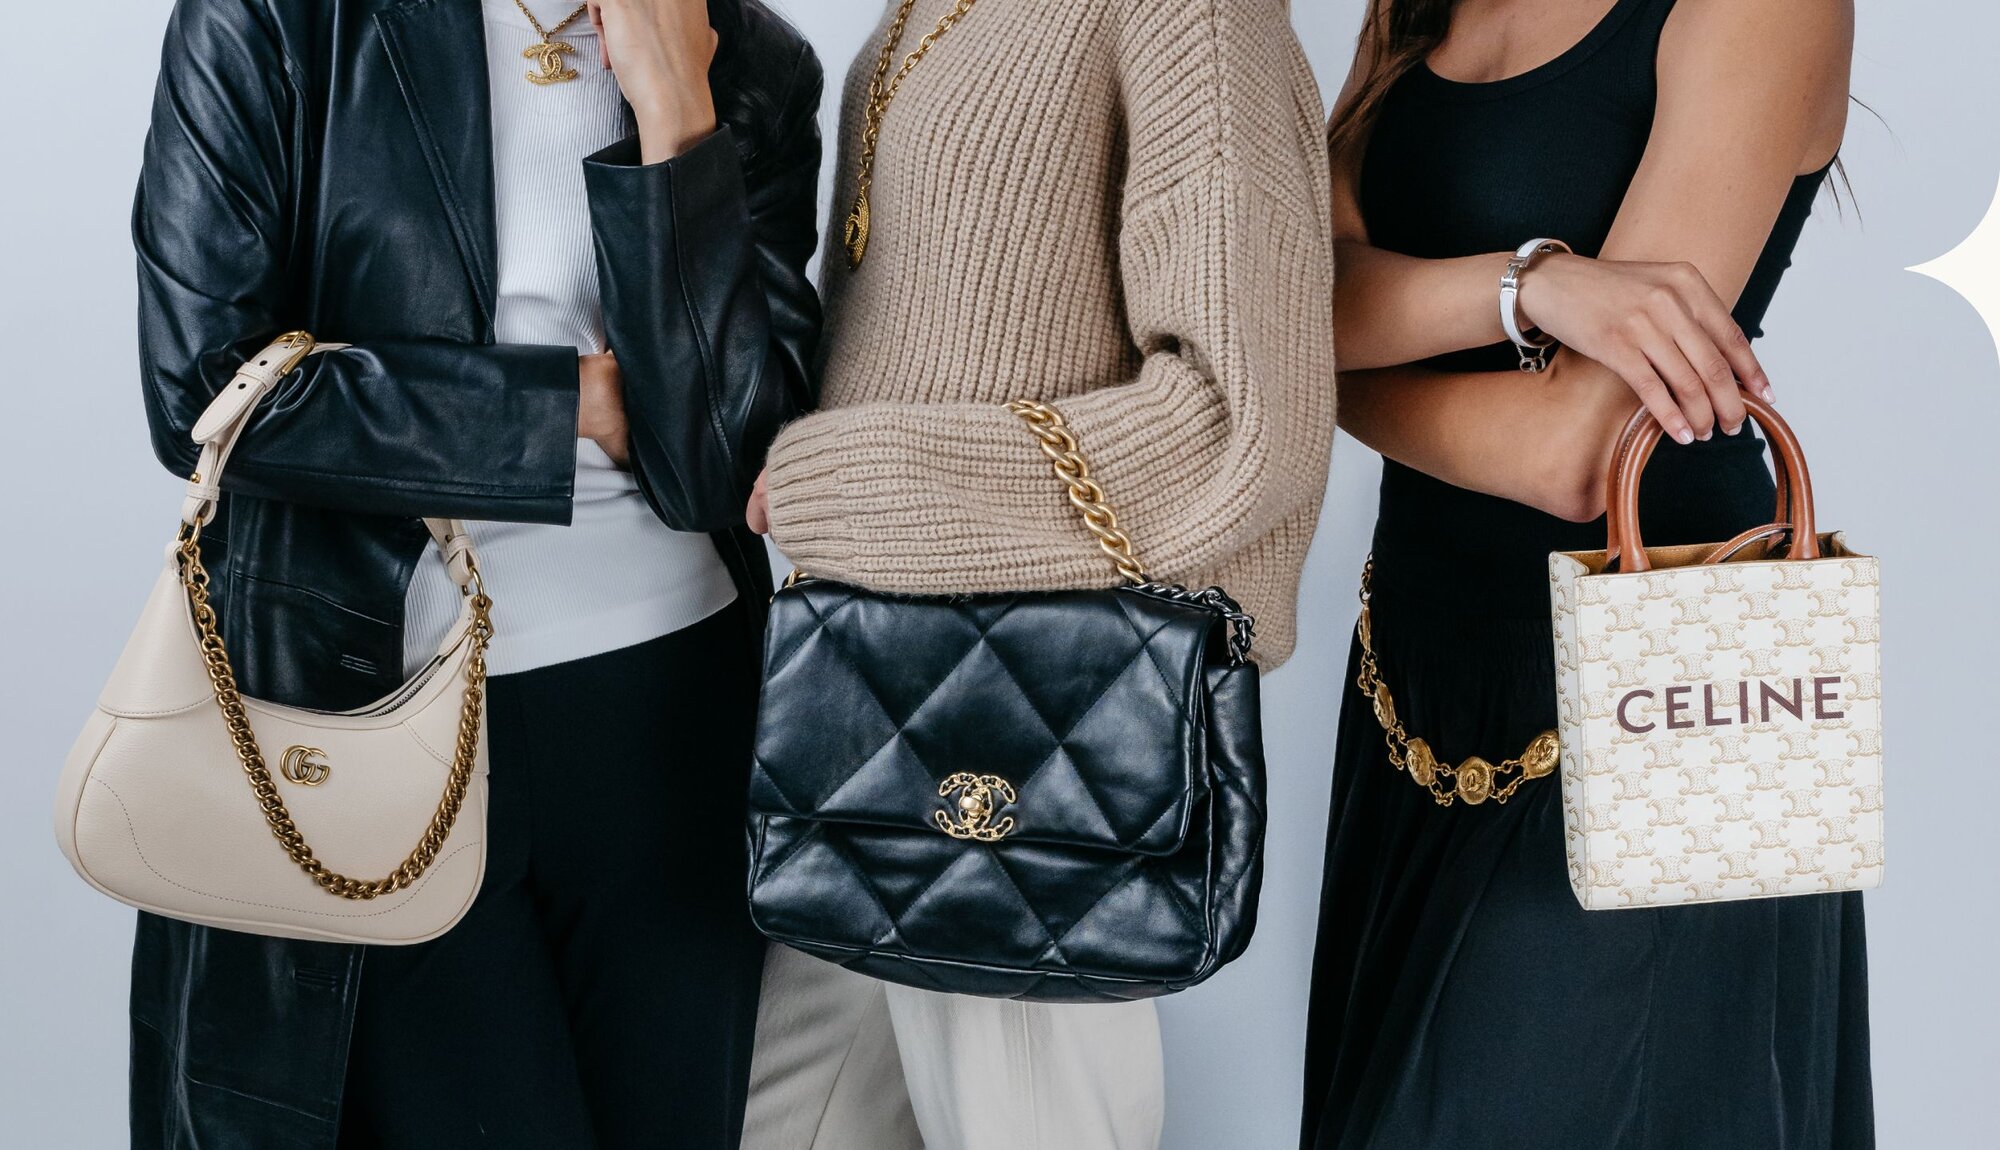 Image of women holding luxury handbags and wearing jewelry from Vivrelle.